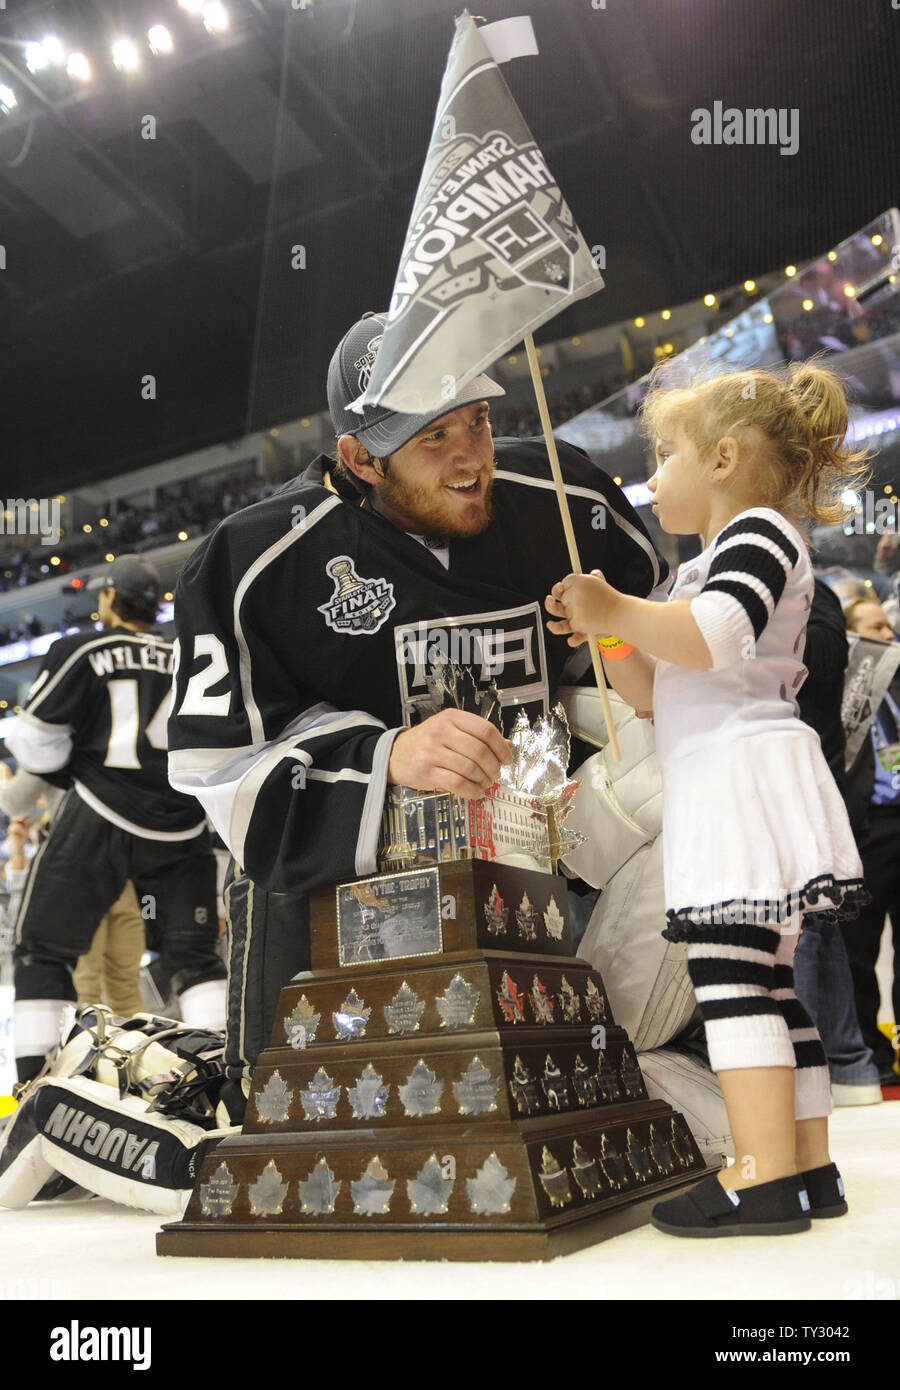 Remembering Jonathan Quick in high school, before Stanley Cup Finals